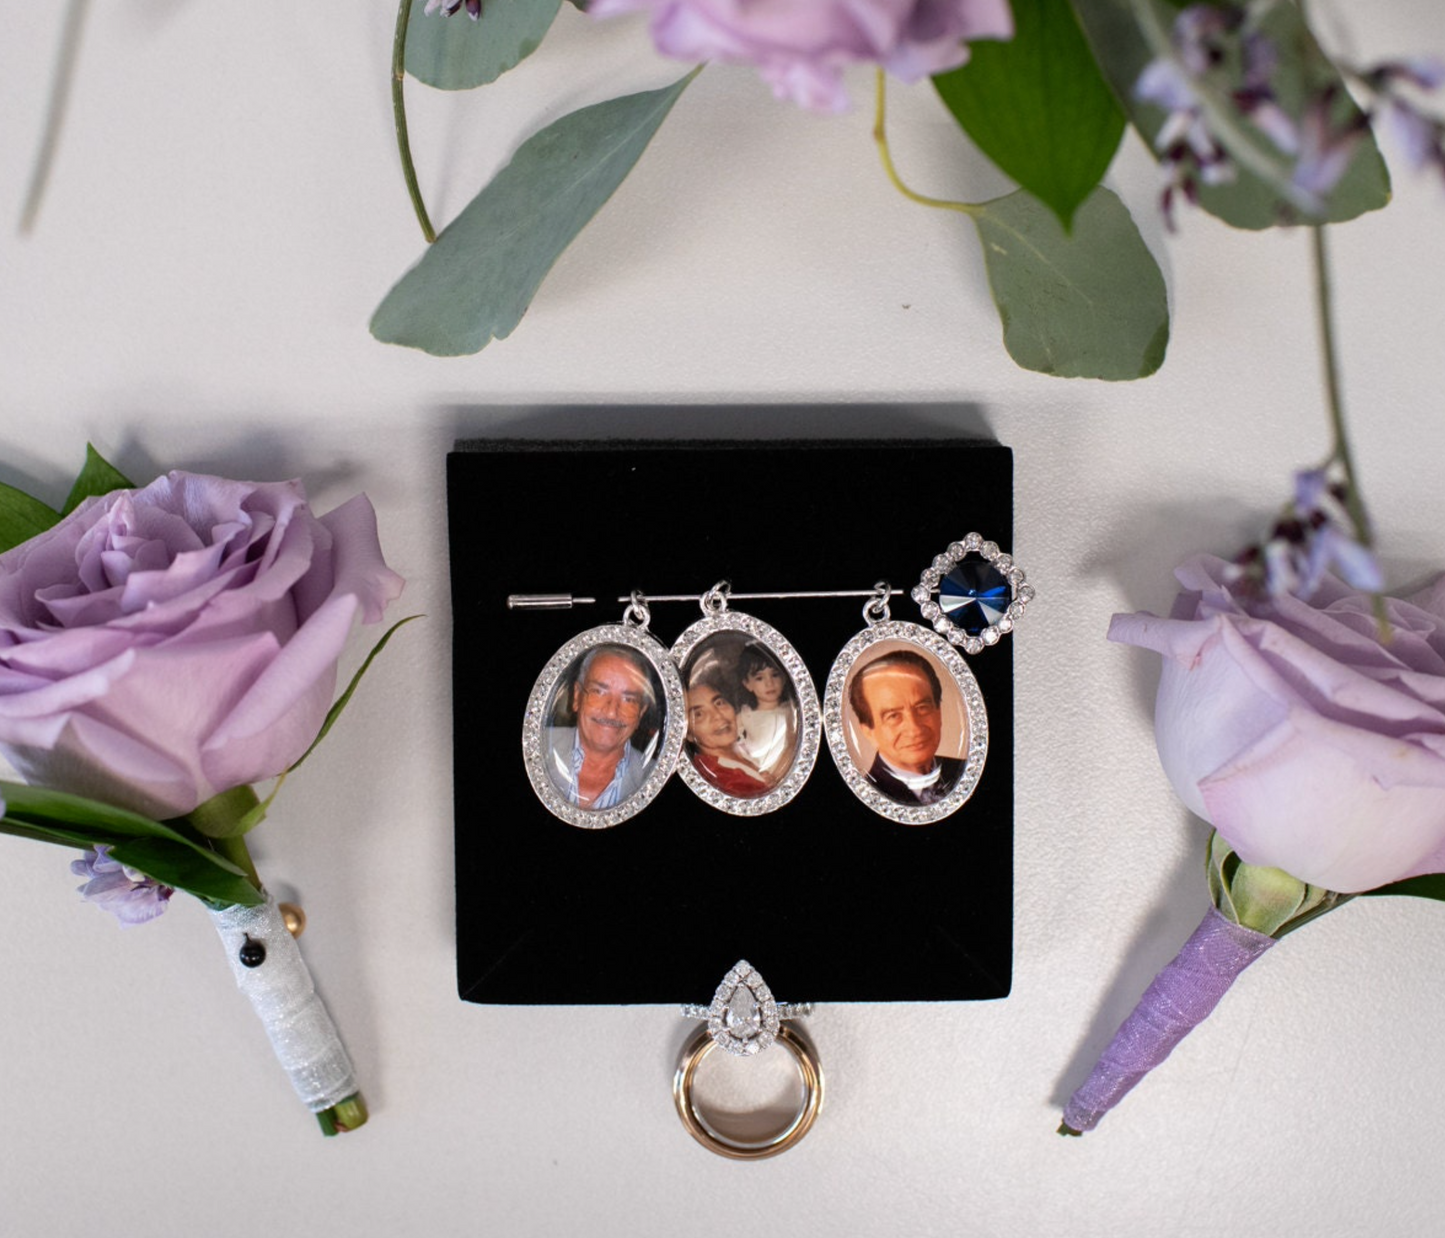 Wedding Memorial Loss of Loved One Photo Charm Something Blue Pin